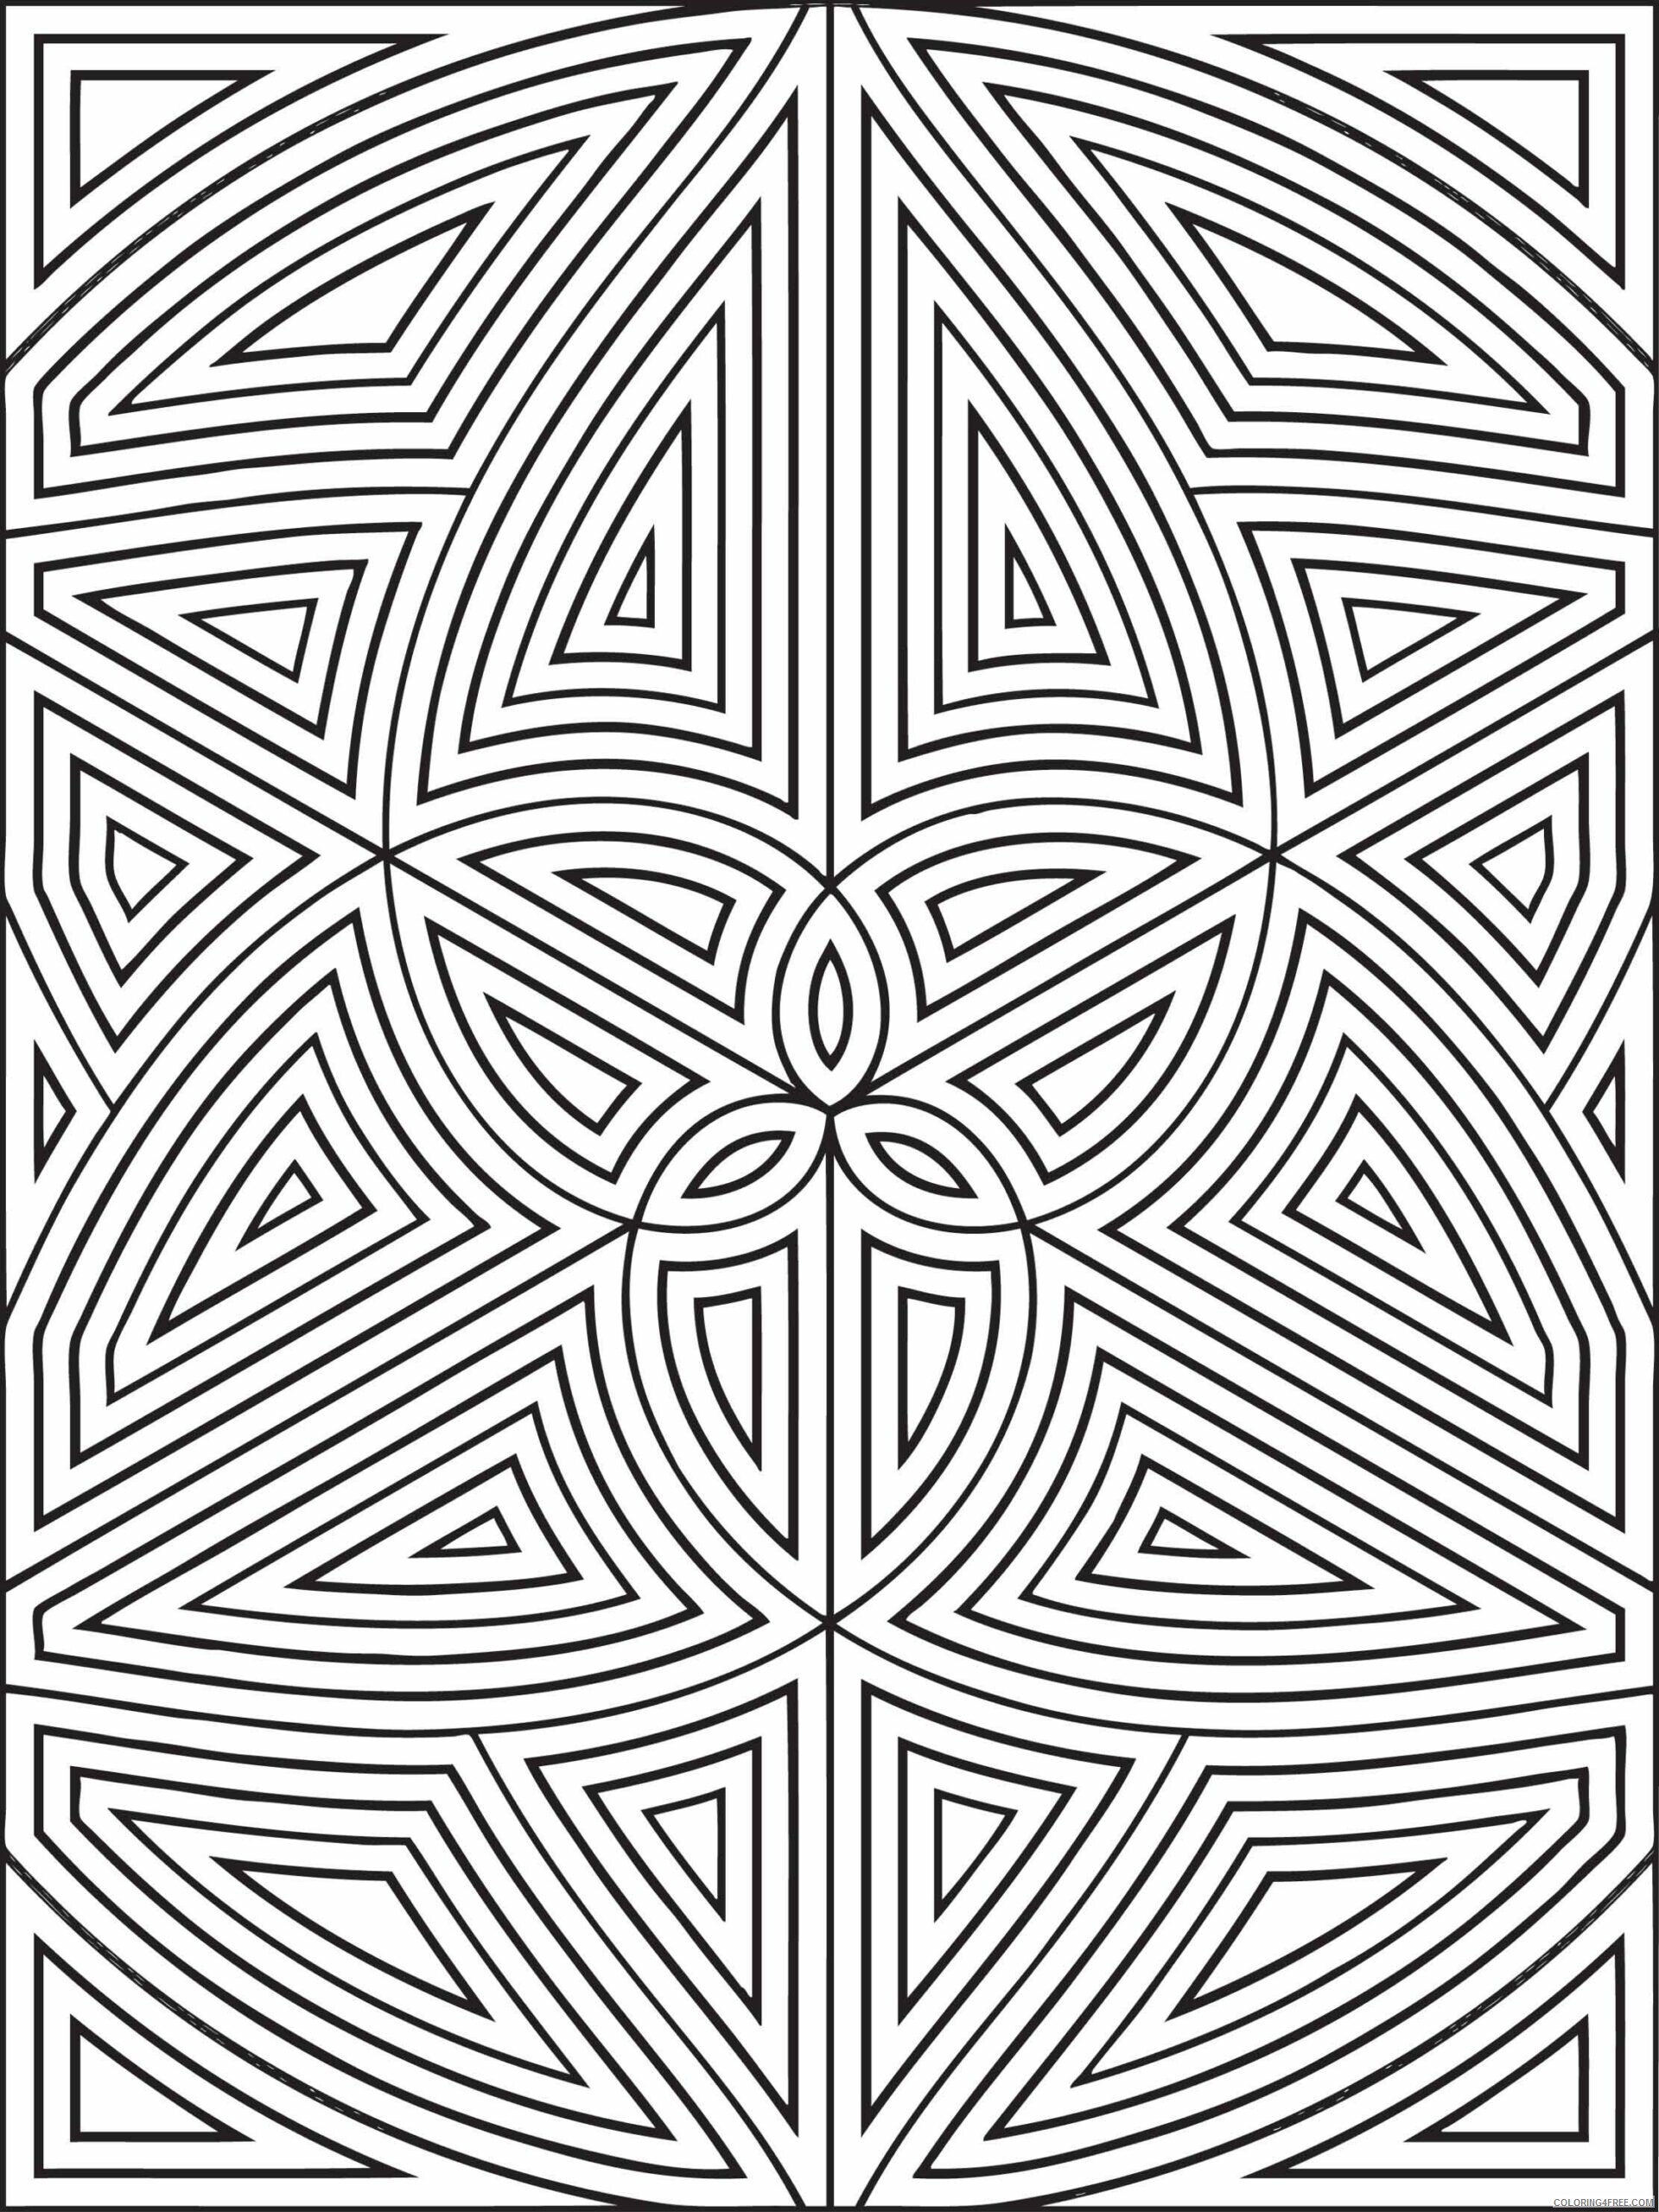 Shapes Coloring Pages Educational Geometric Shapes Printable 2020 1869 Coloring4free Coloring4free Com